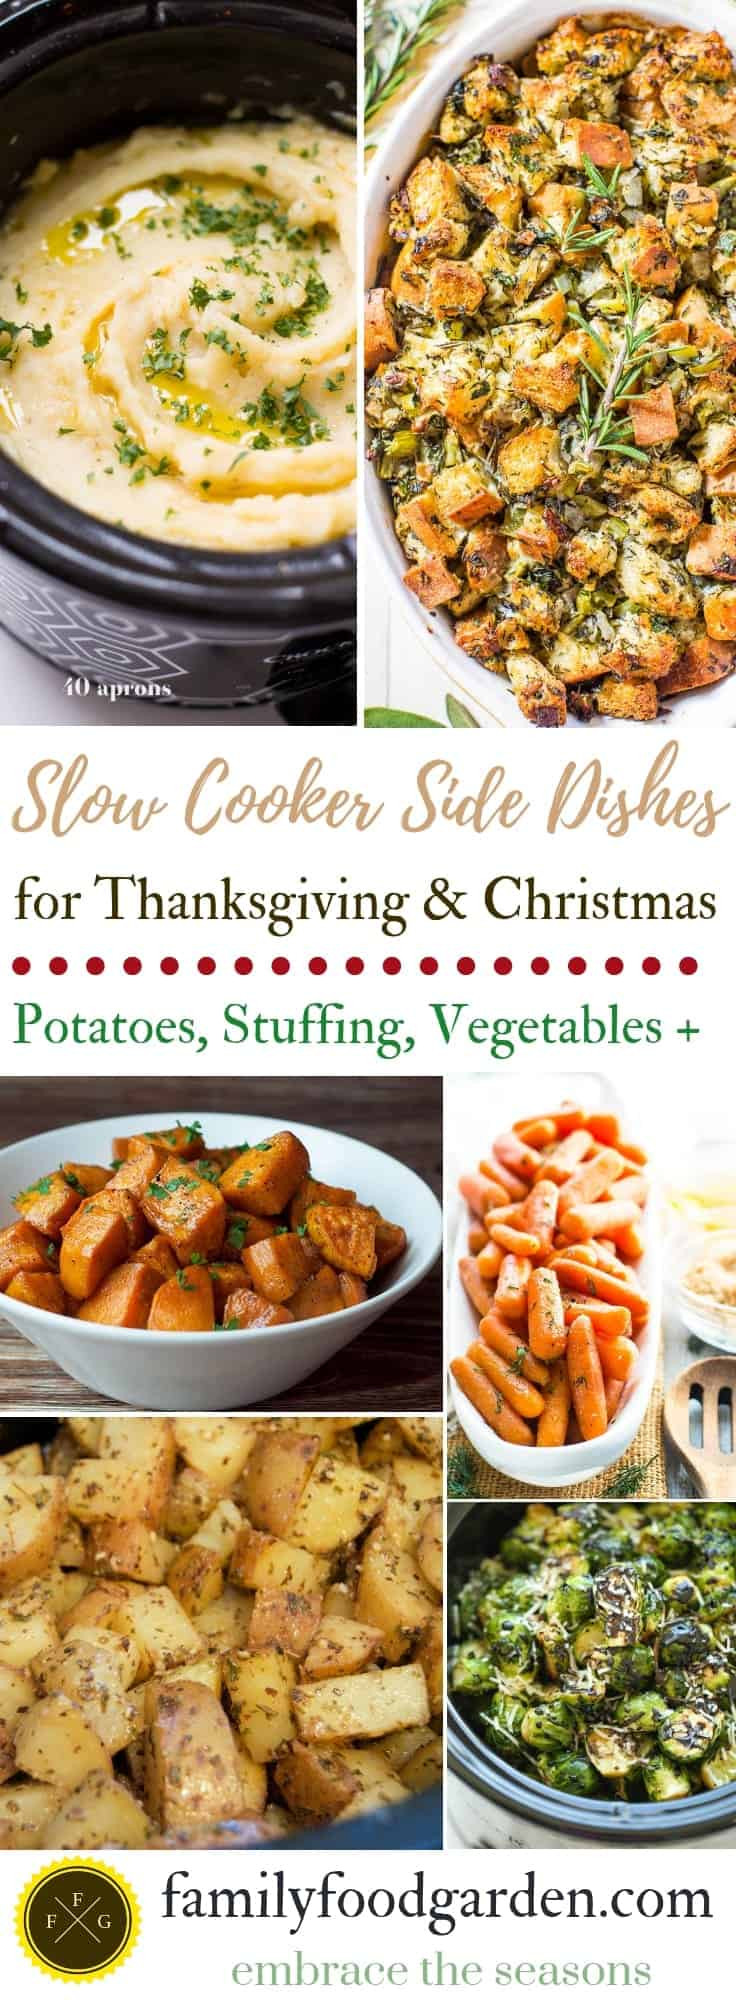 Crock Pot Side Dishes
 Crockpot Side Dishes you Need this Holiday Season